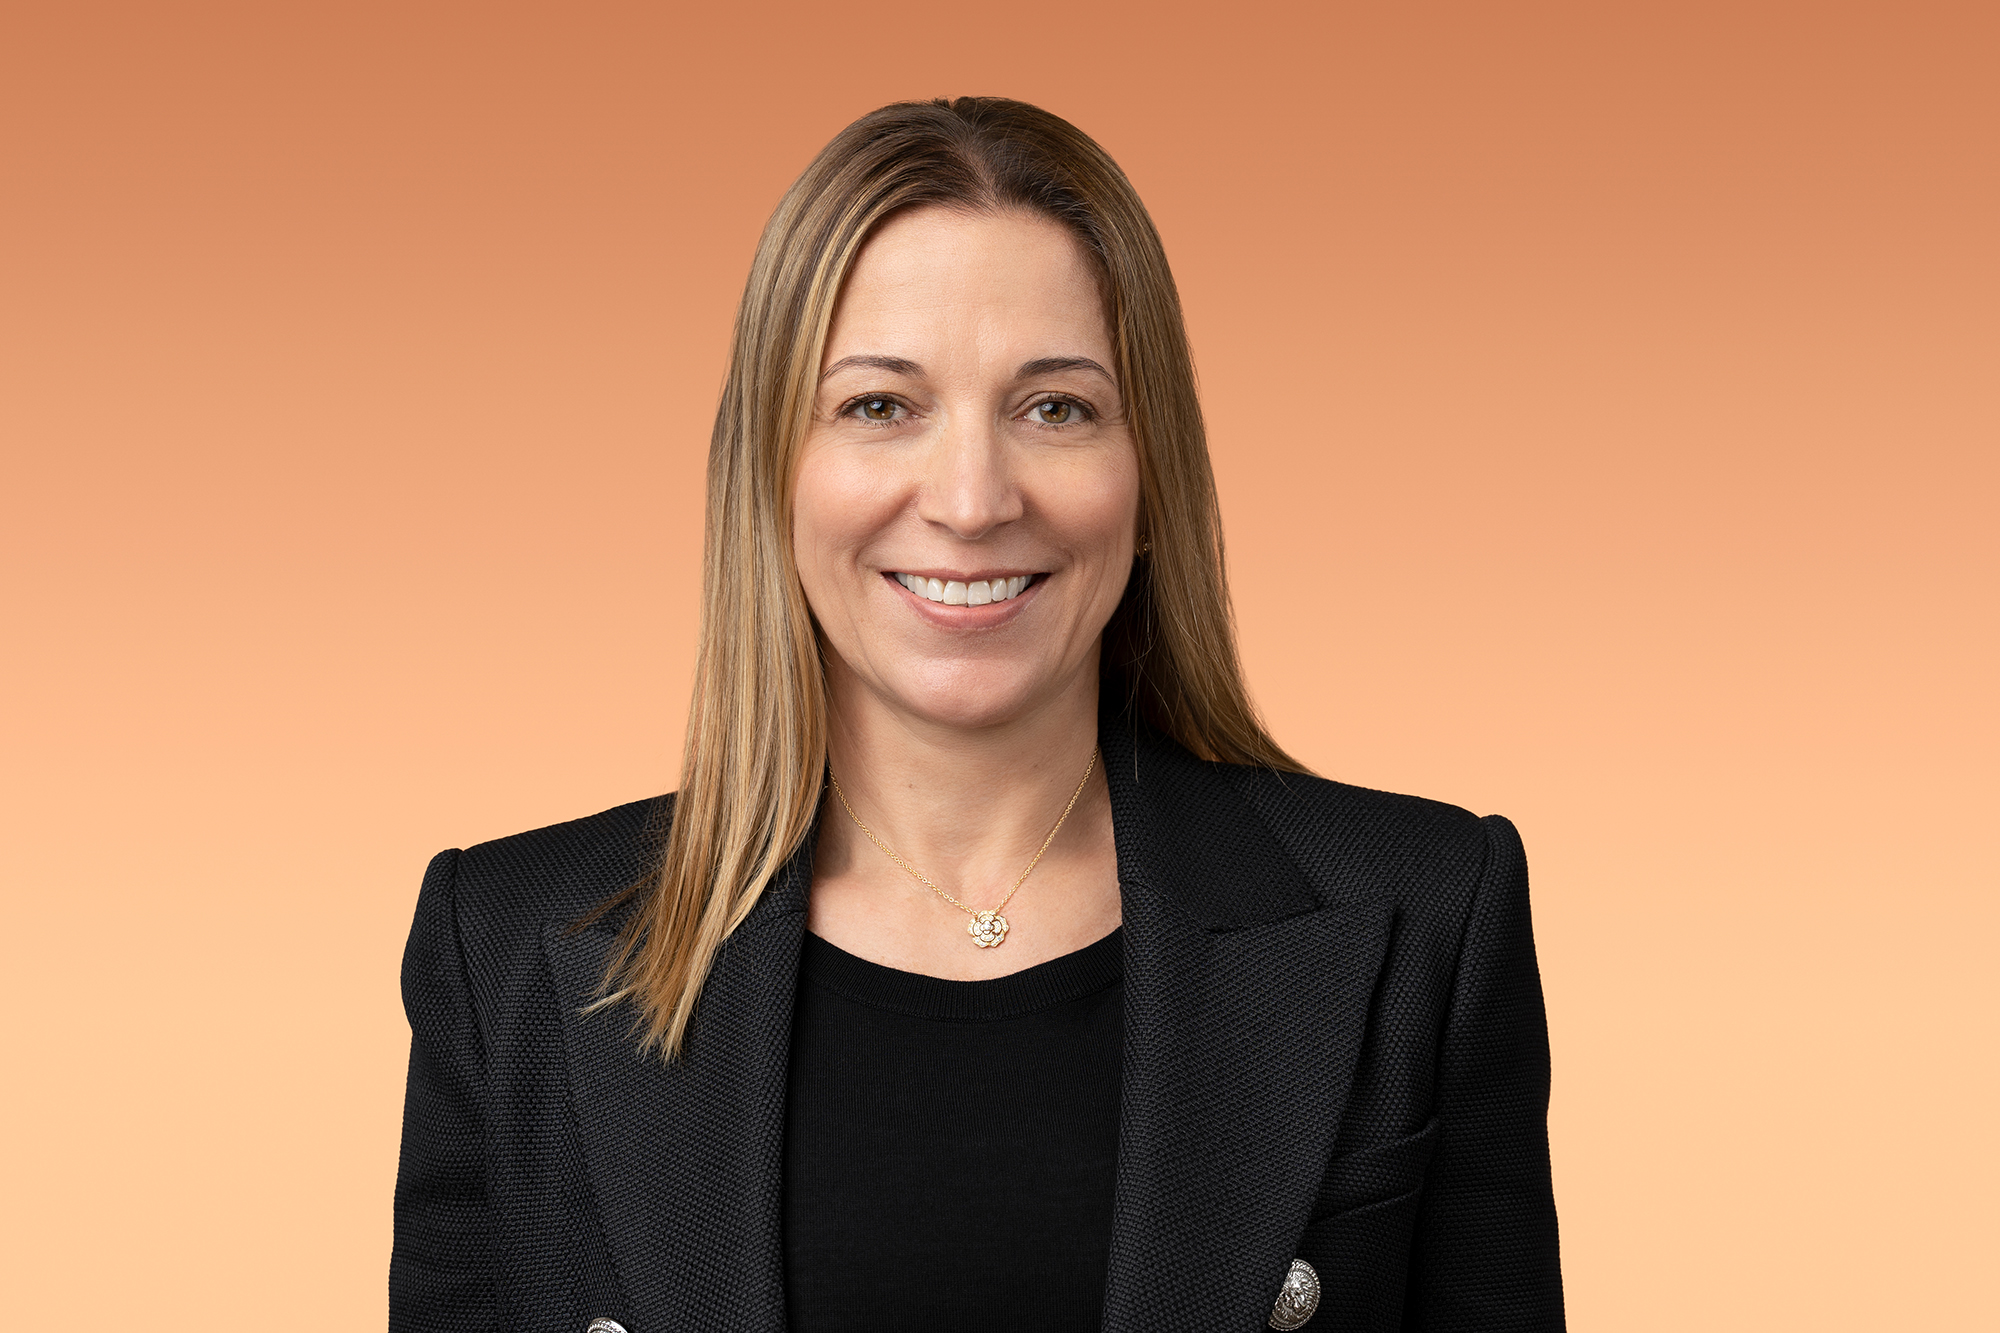 A woman in a black blazer posing for a headshot against an orange background.